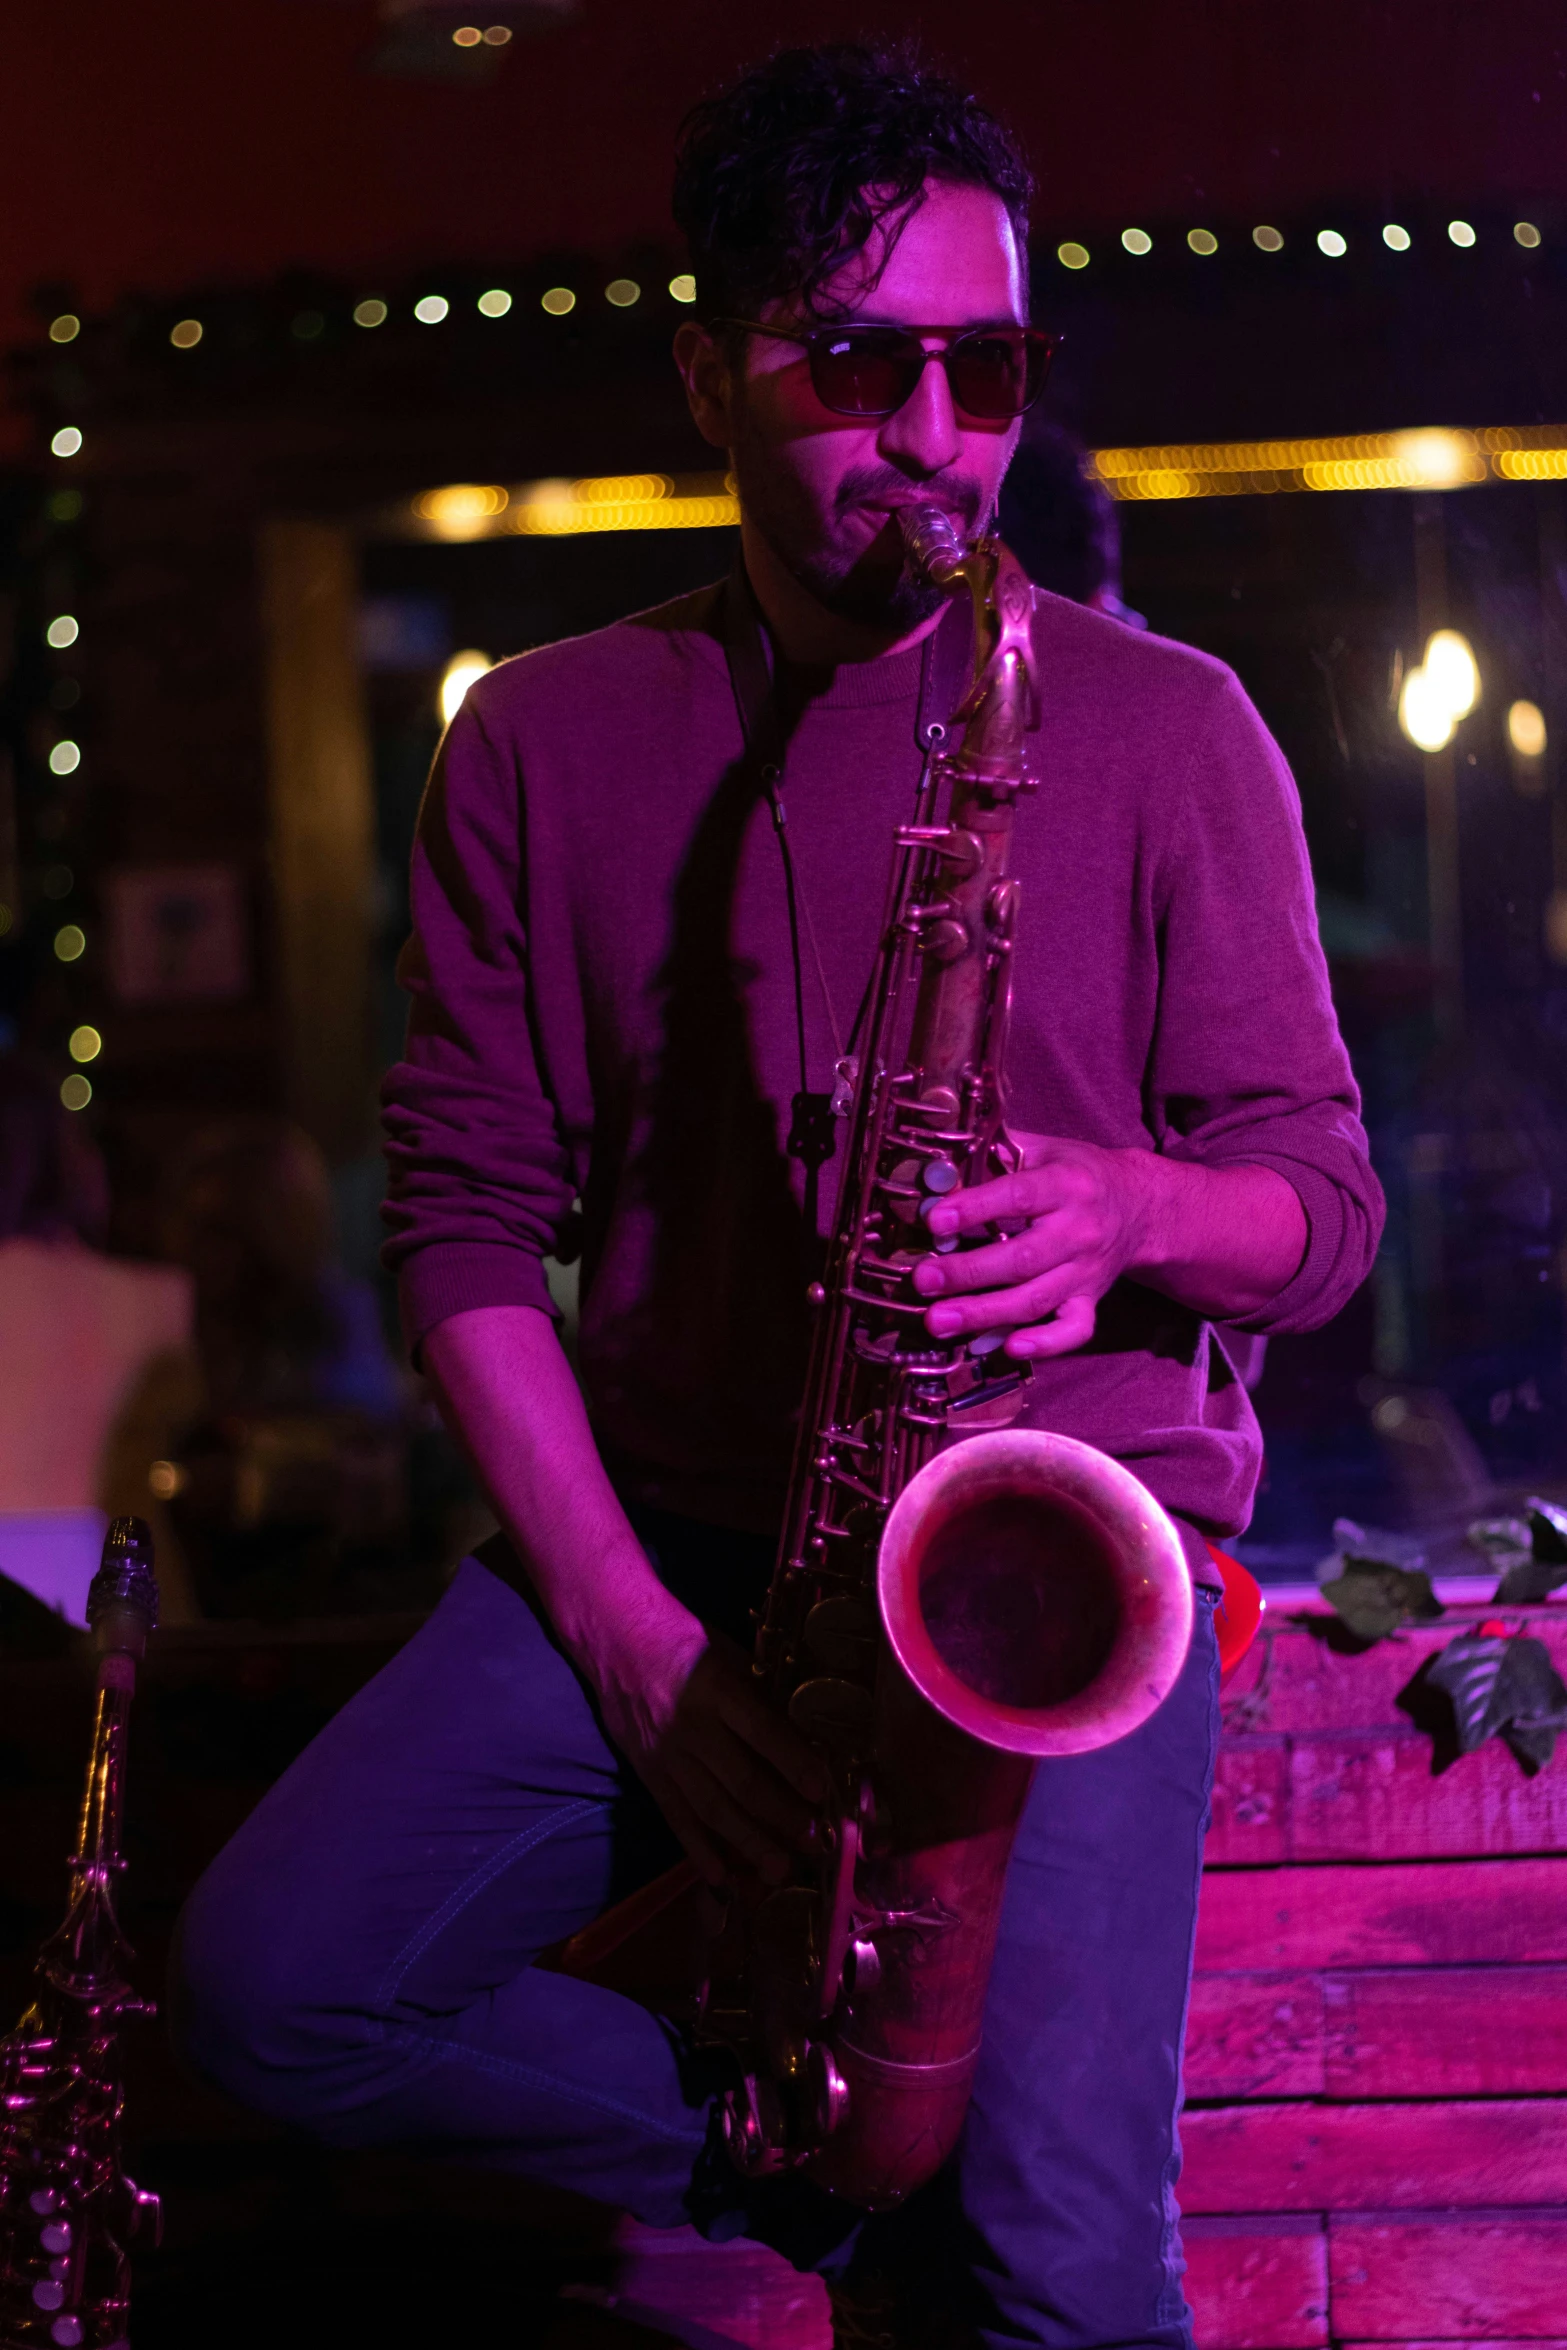 a man with glasses sitting down playing a saxophone